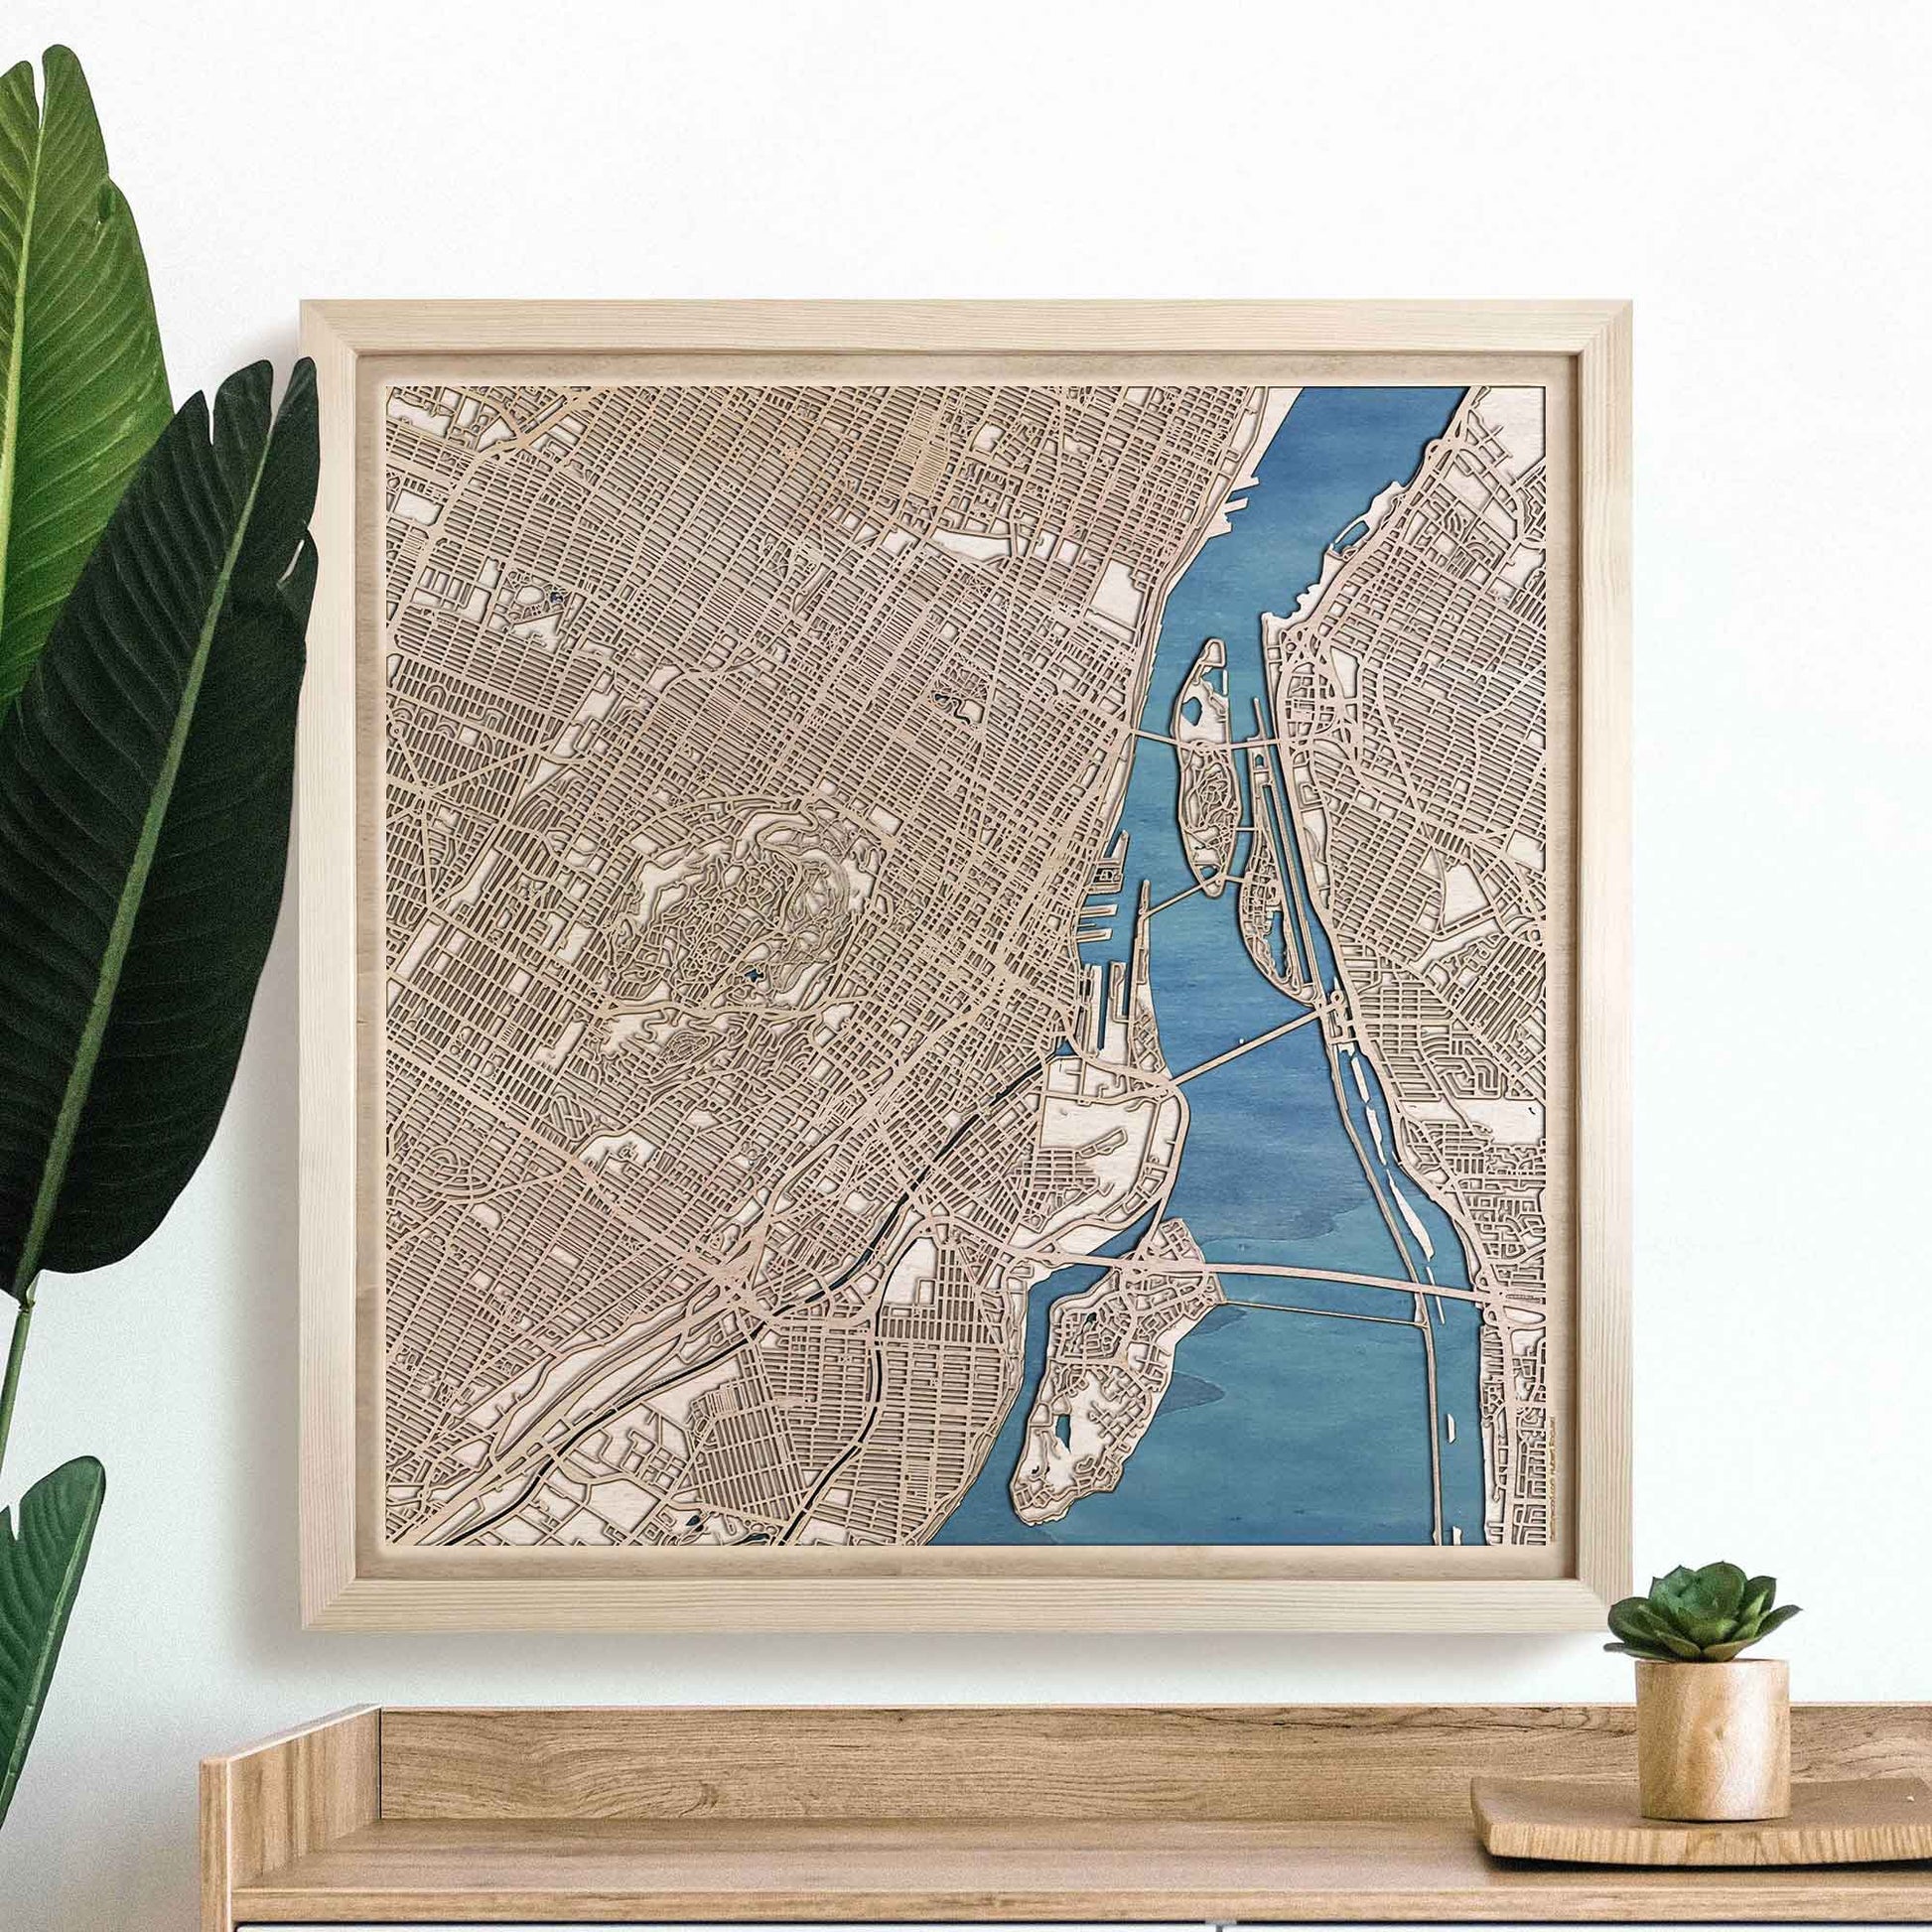 Montreal Wooden Map by CityWood - Custom Wood Map Art - Unique Laser Cut Engraved - Anniversary Gift